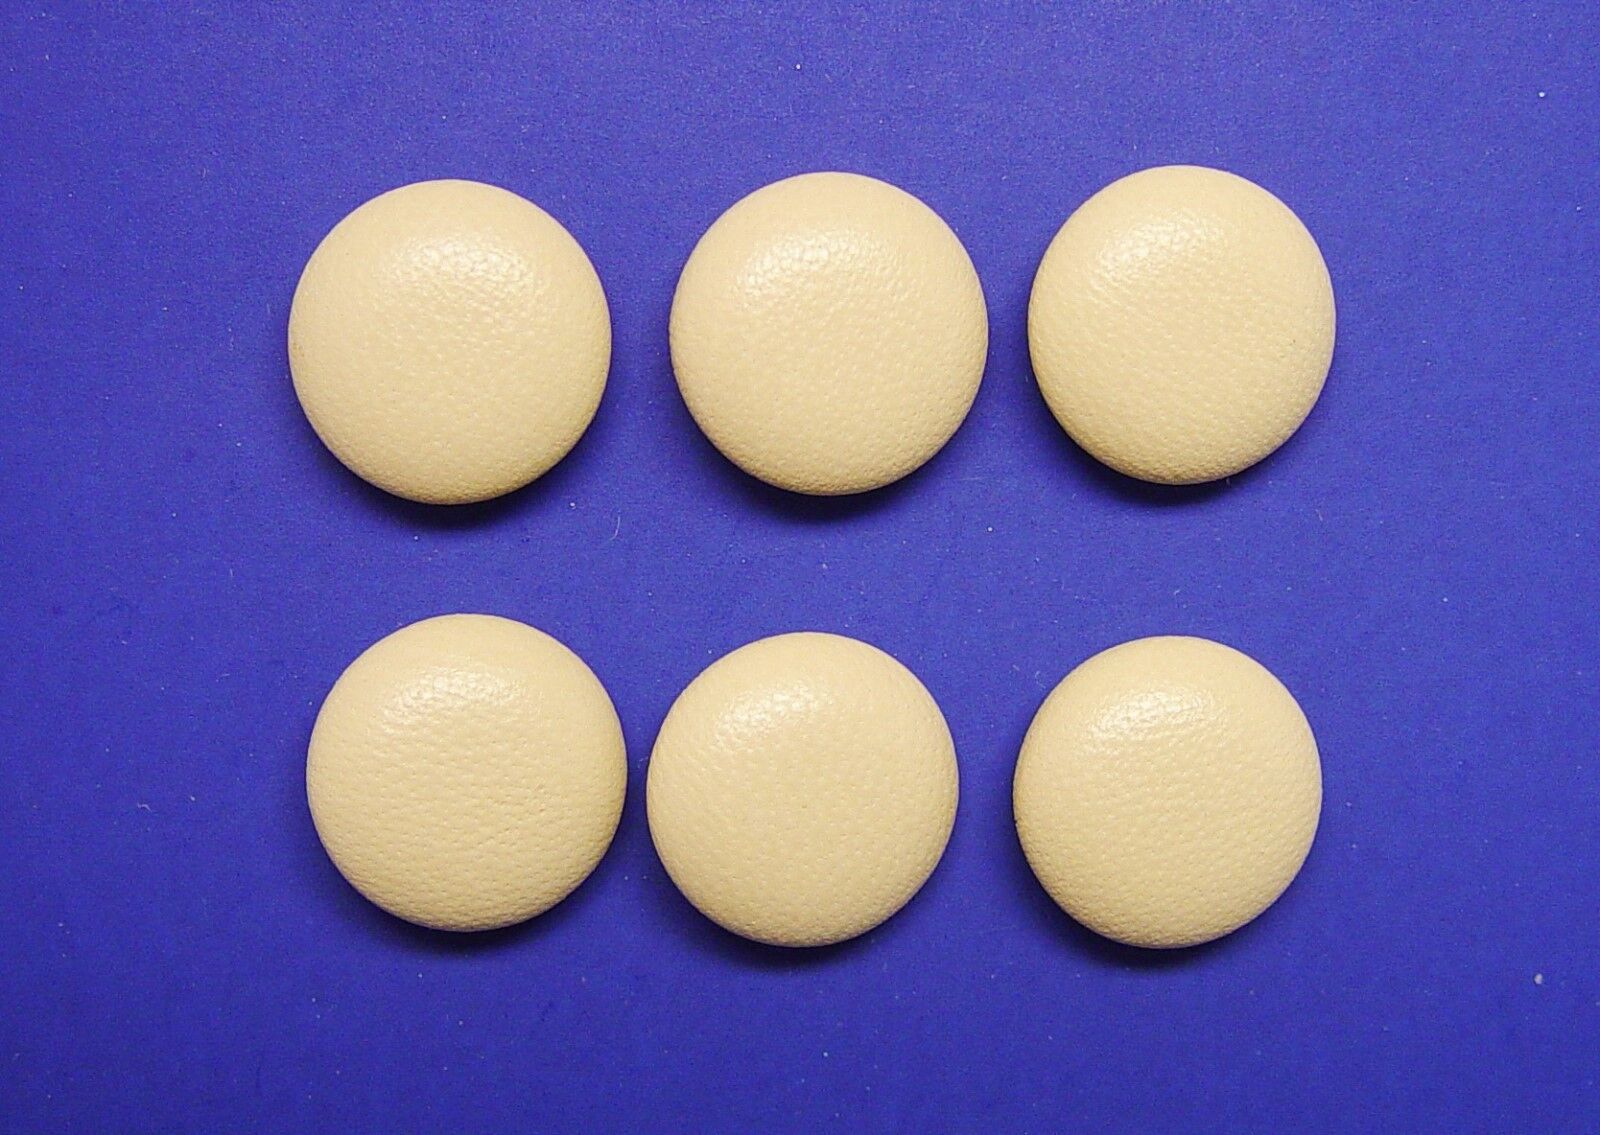 6 REPLACEMENT BUTTONS MADE IN USA FOR VINTAGE OUTFITS 15 MM, SOFT BEIGE LEATHER